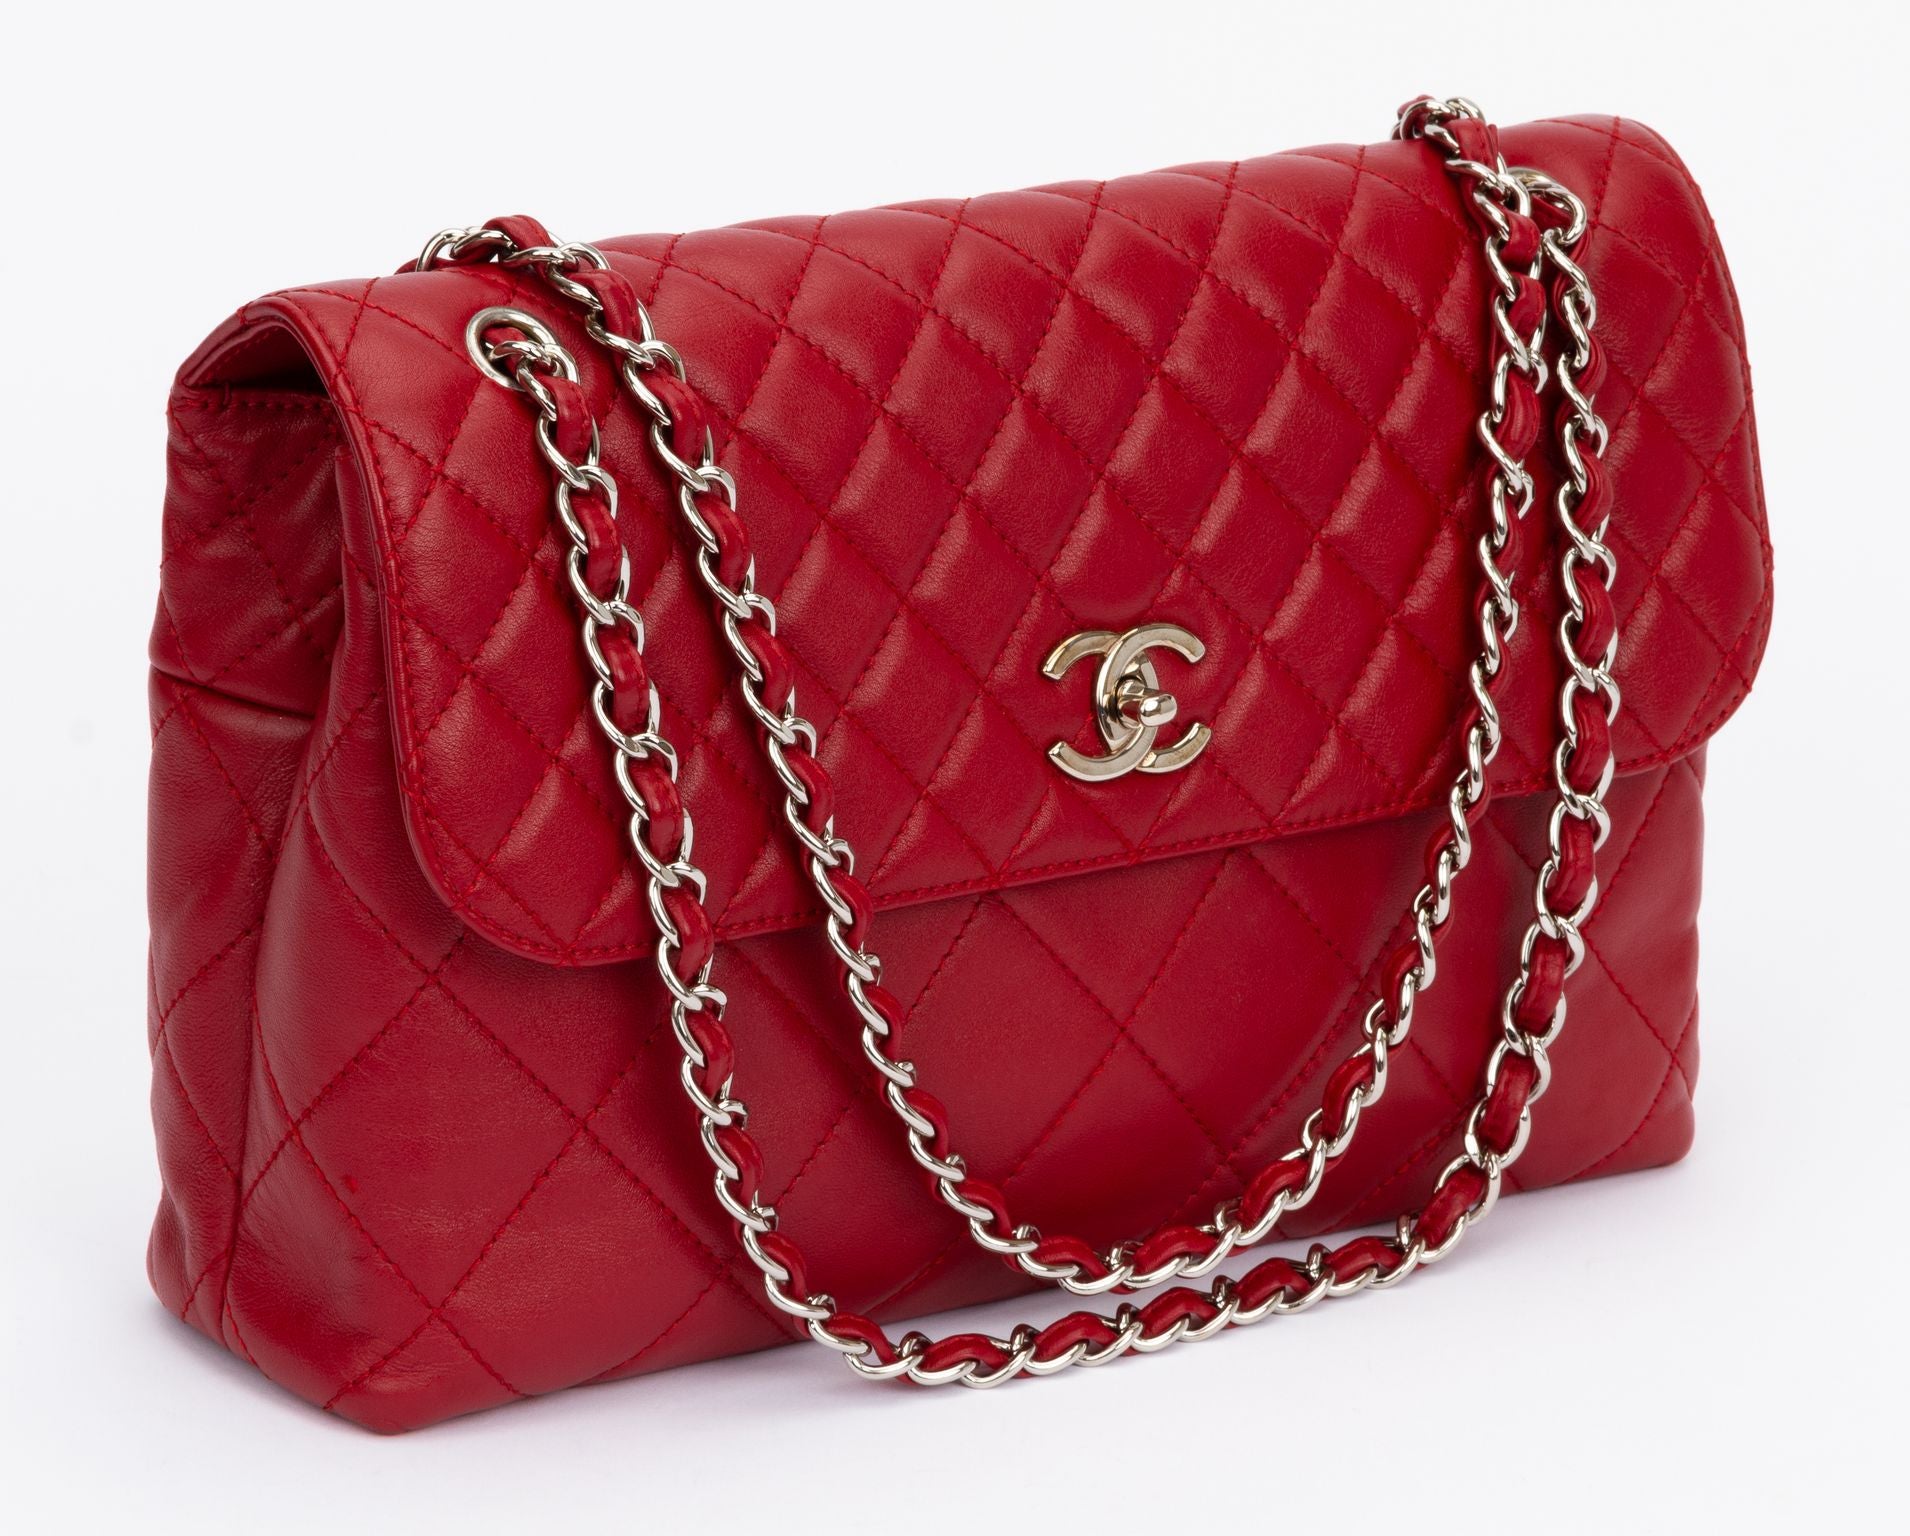 The Business Flap Bag Red - Vintage Lux